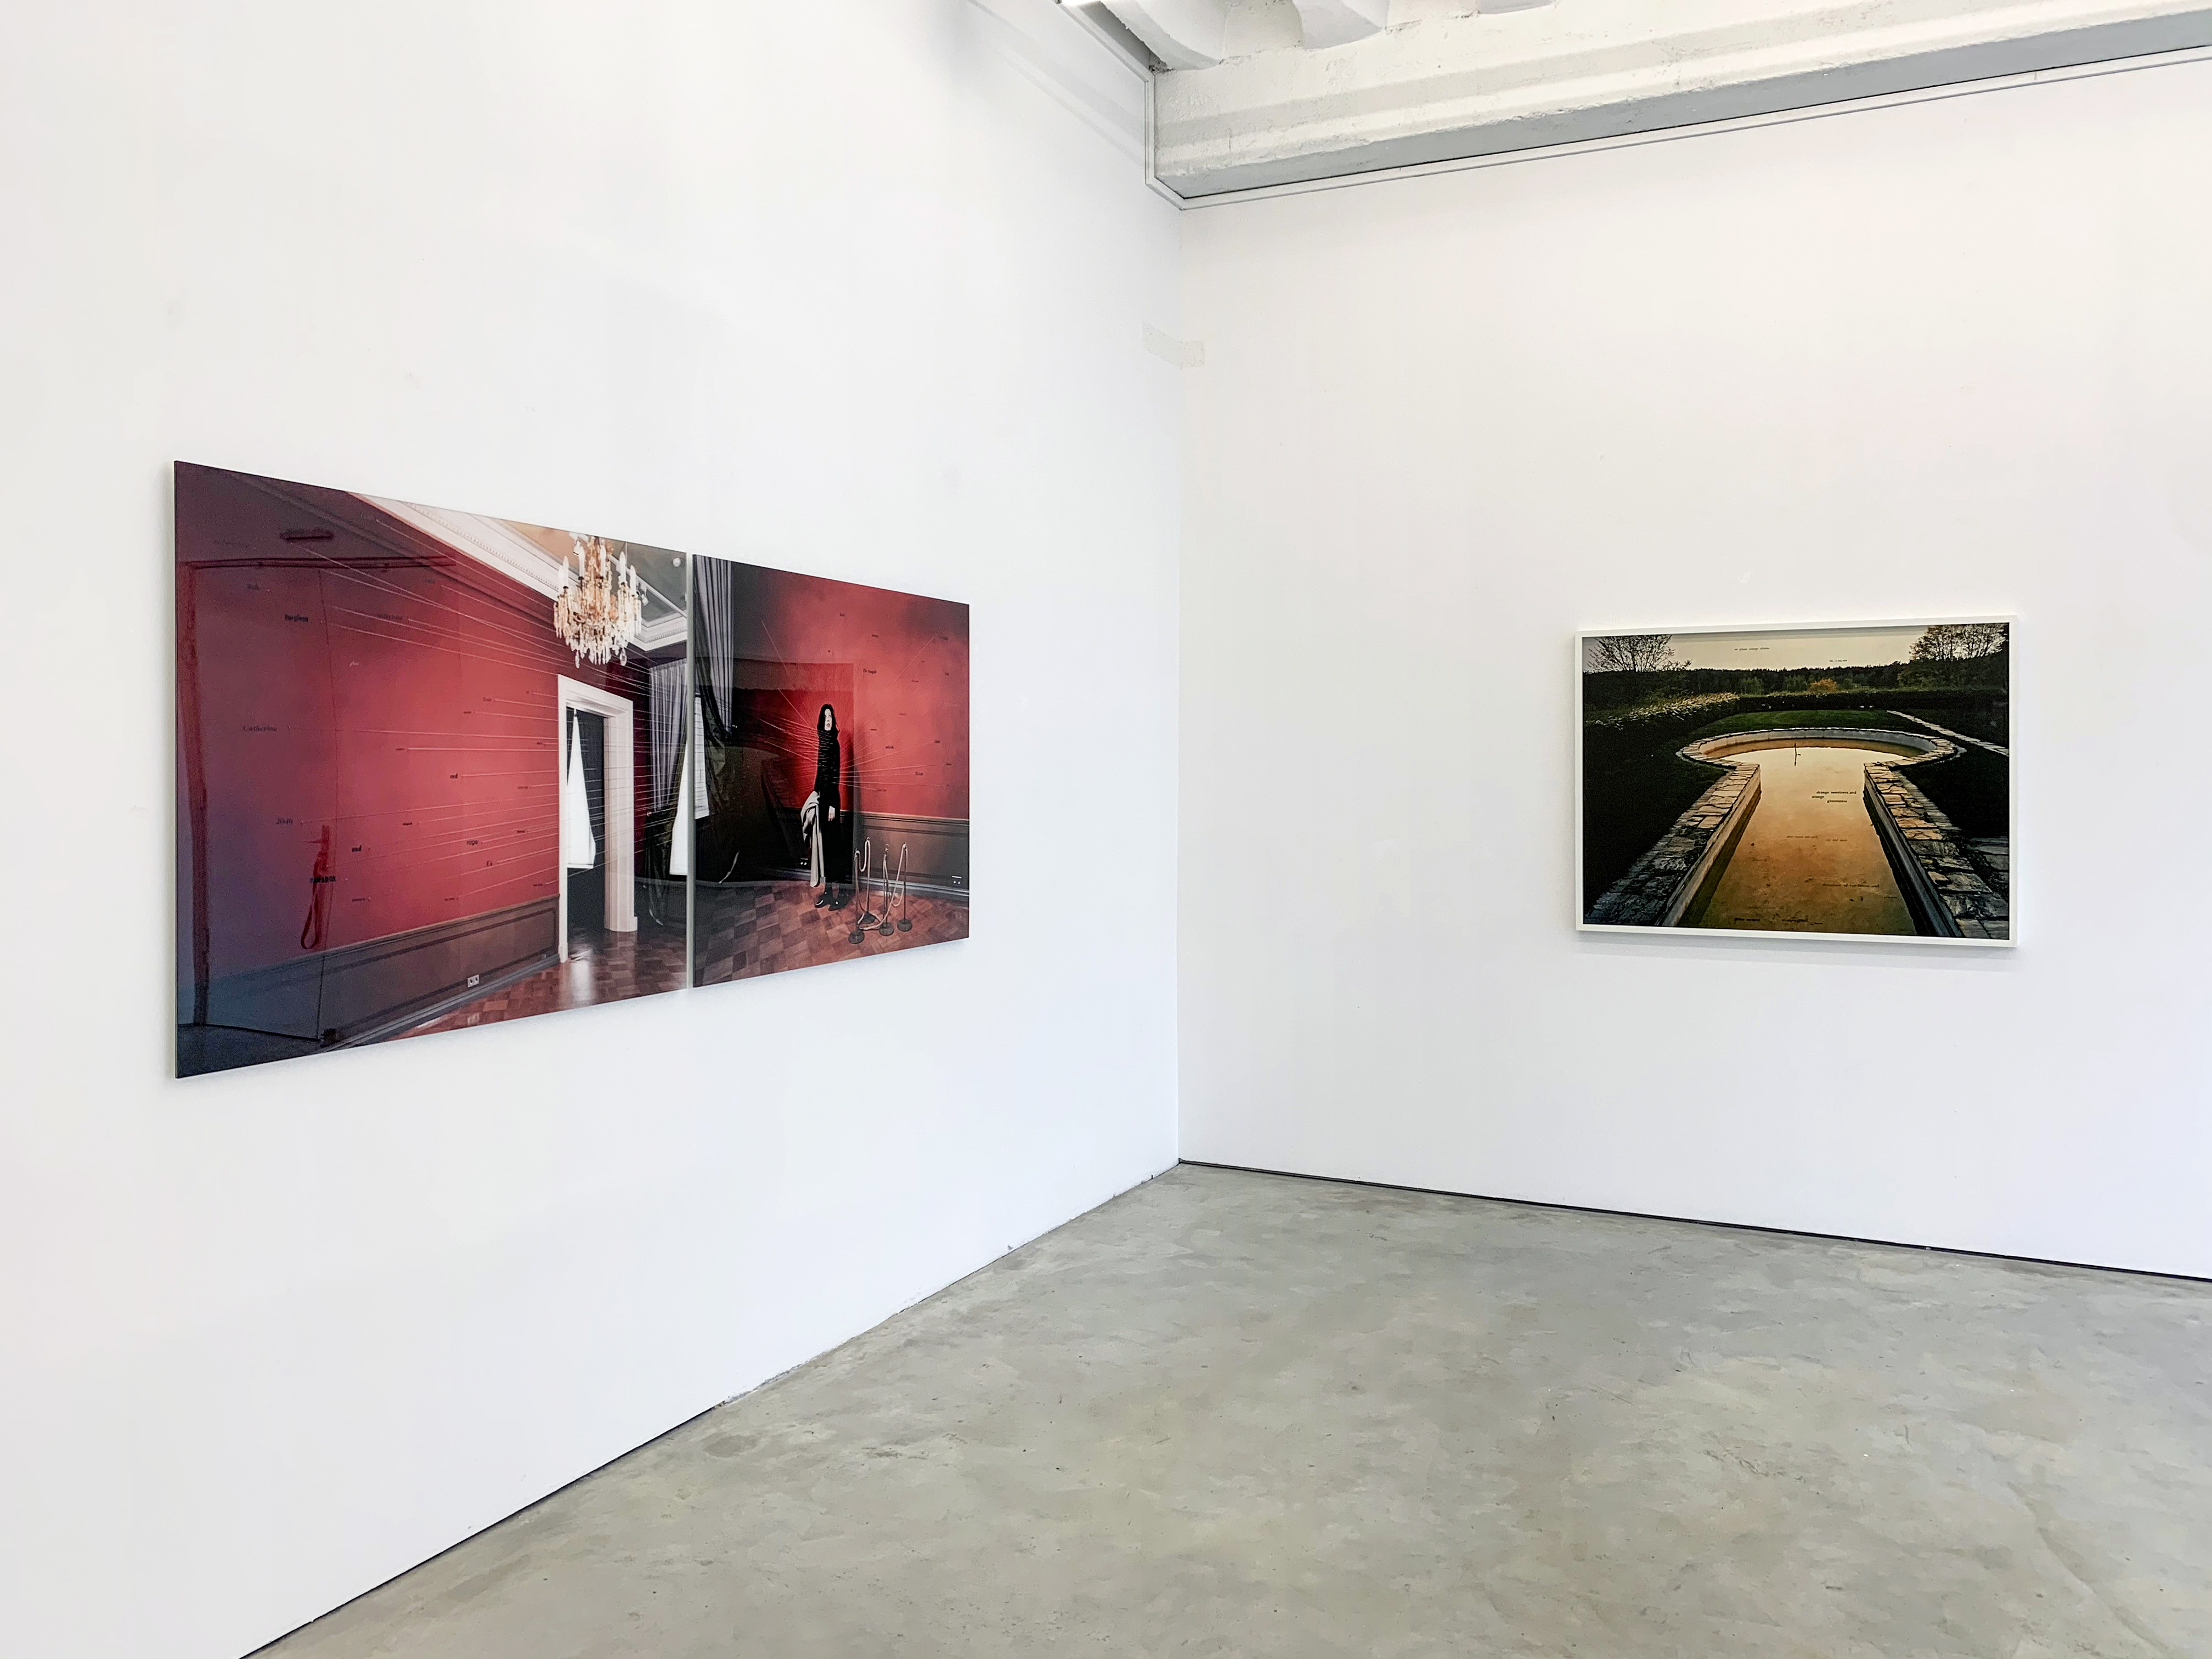 Installation View Jyrki Parantainen at Persons Projects, Berlin 2020